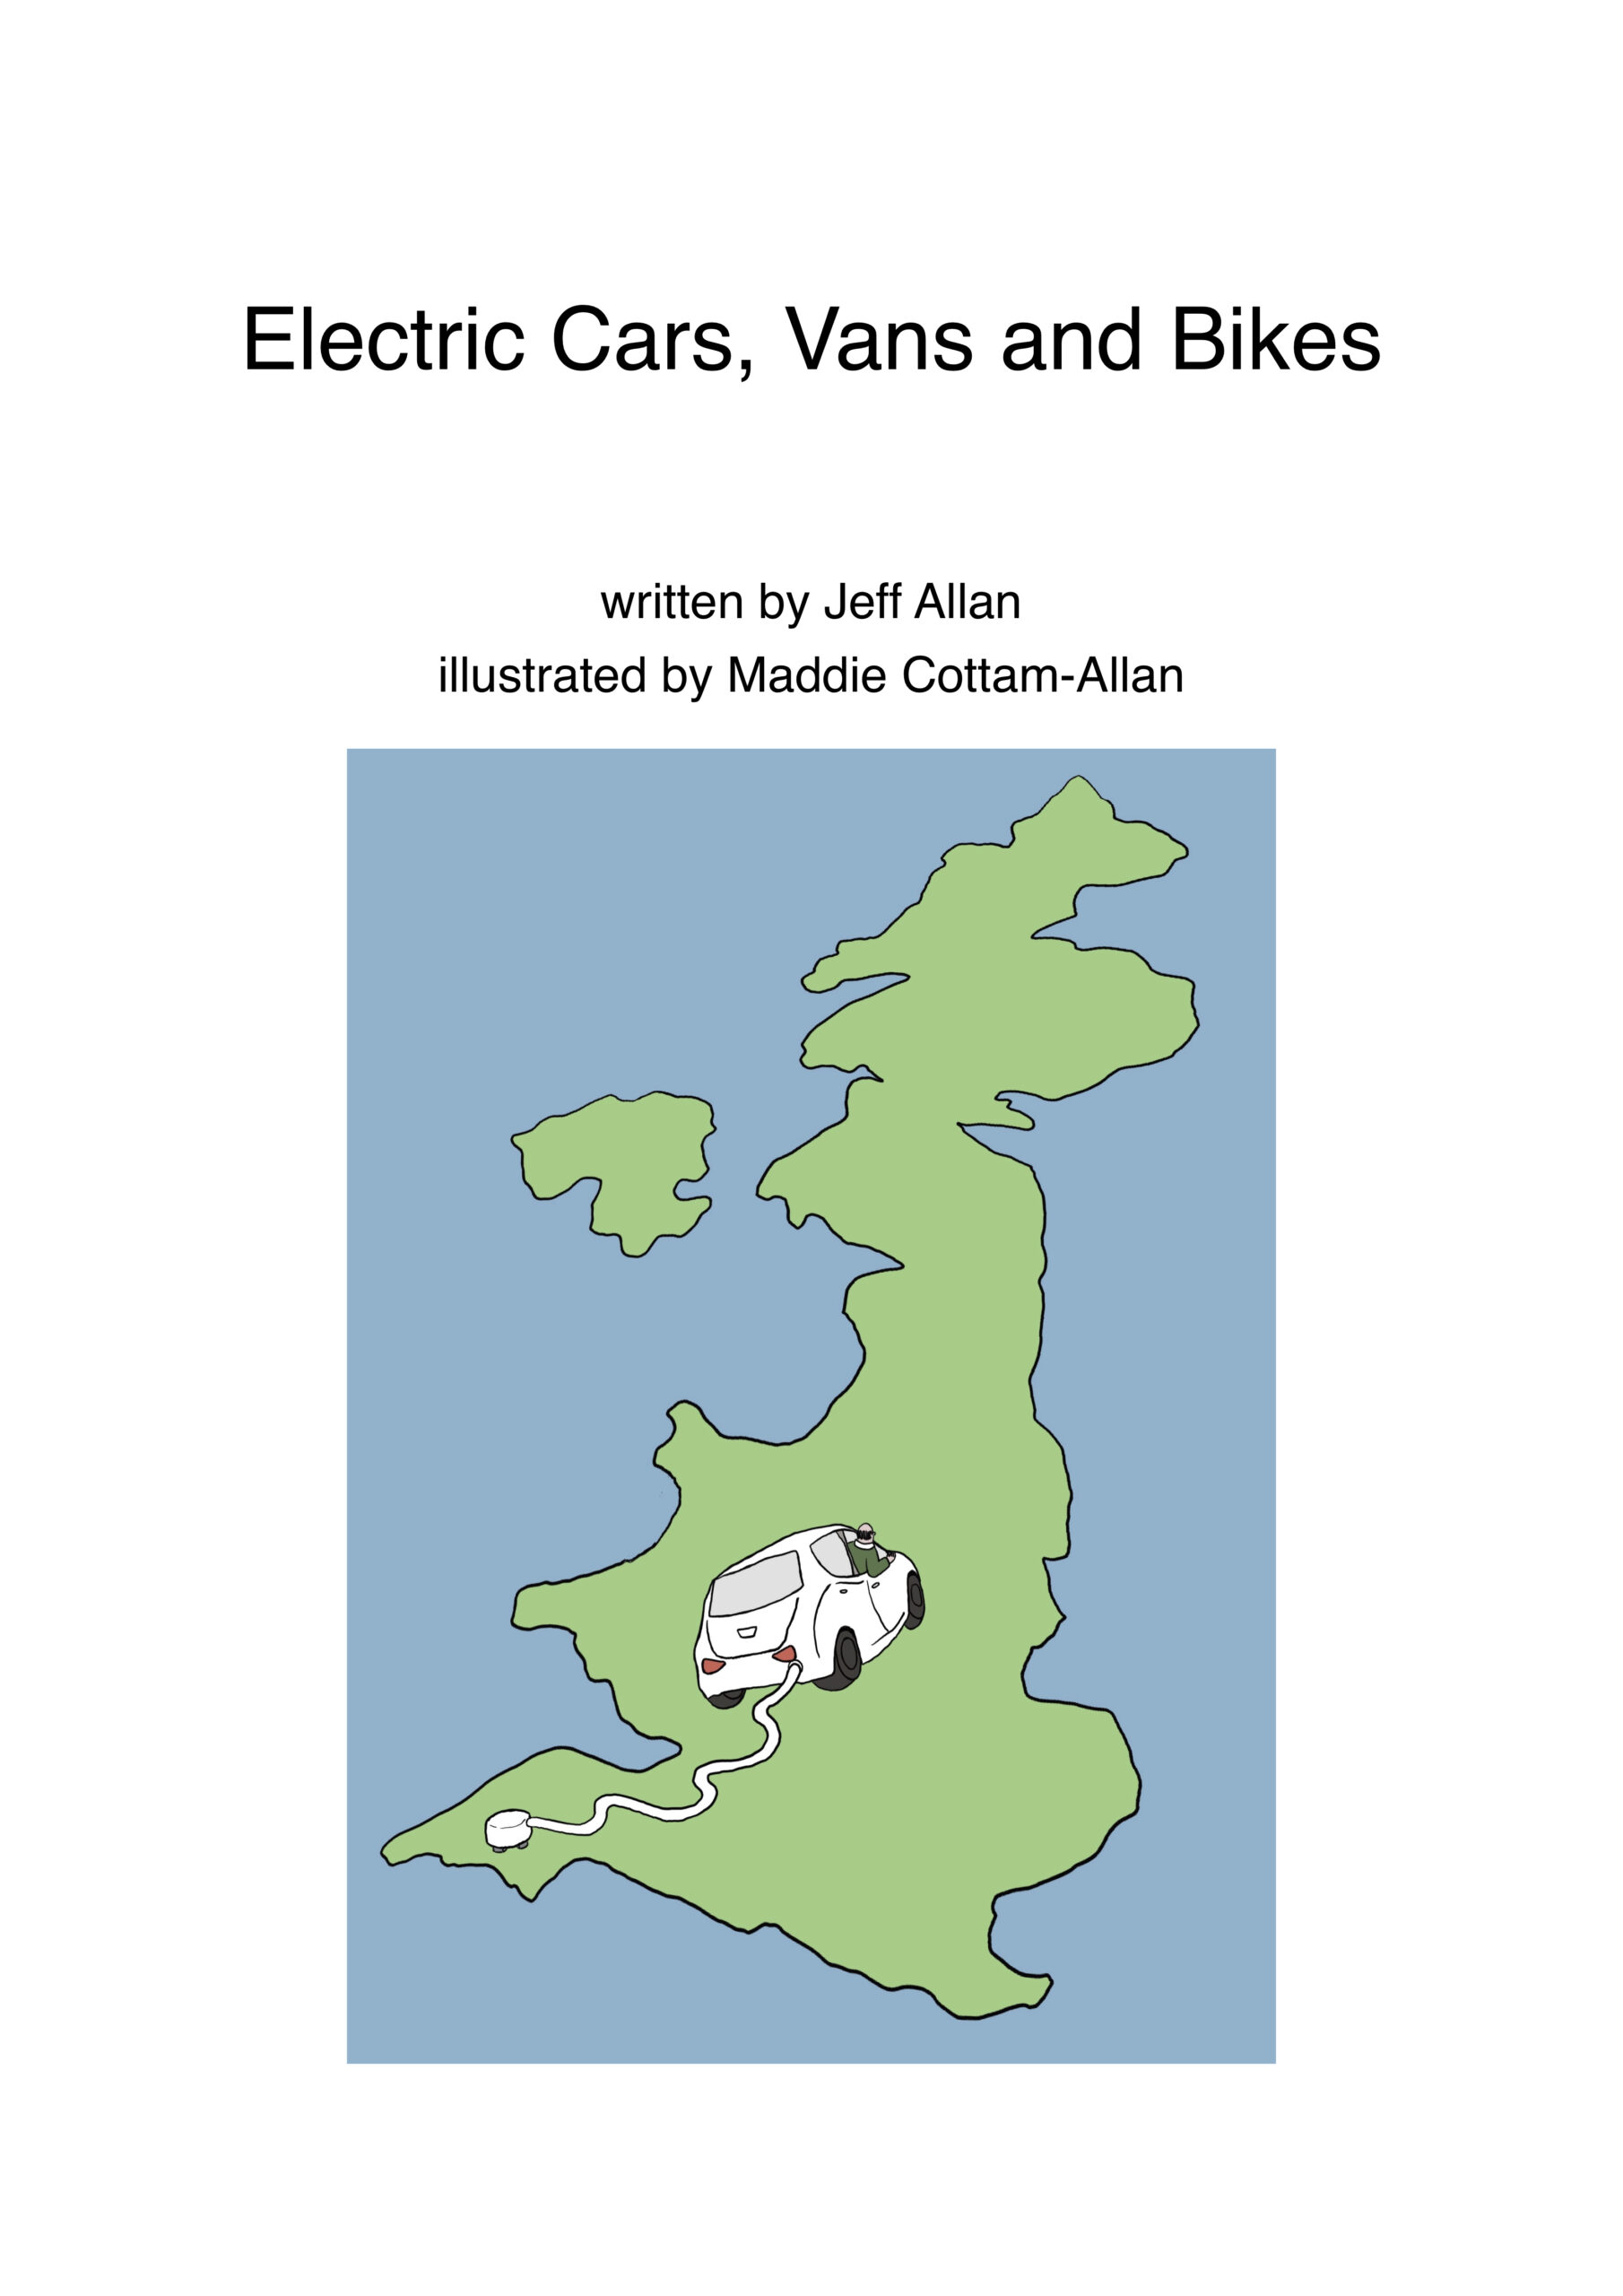 Electric Cars, Vans and Bikes book cover